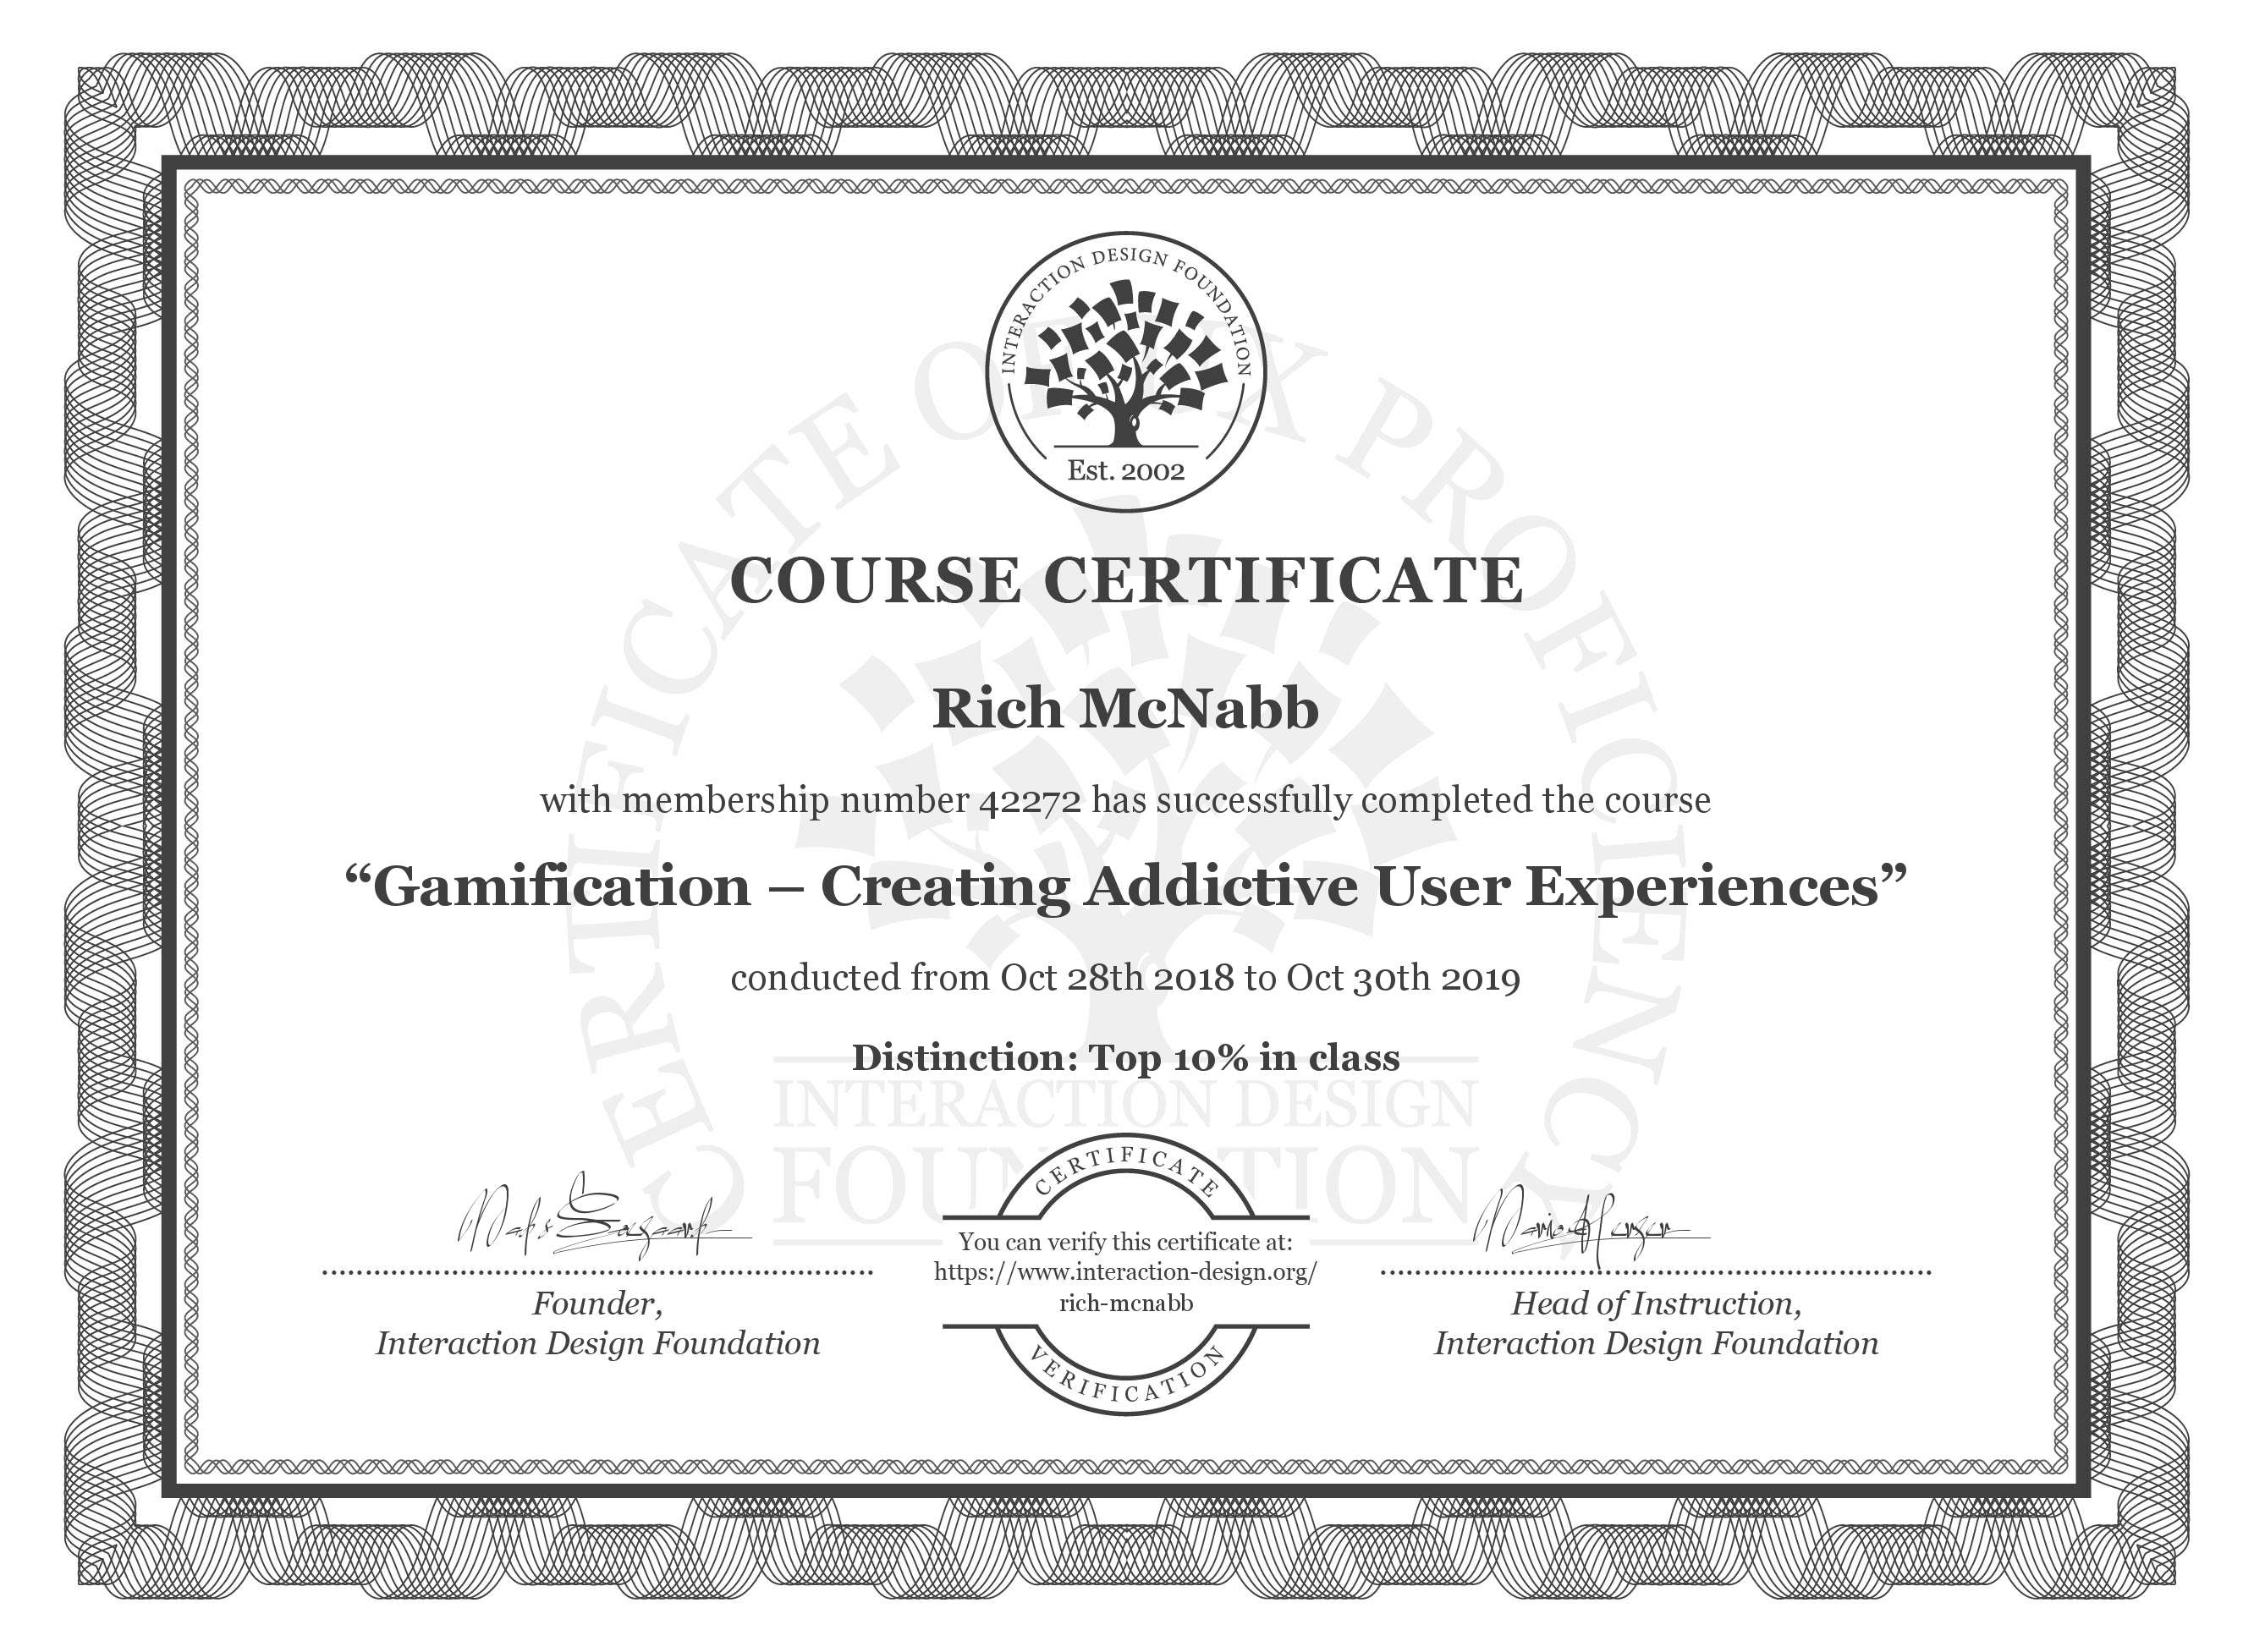 Gamification – Creating Addictive User Experiences